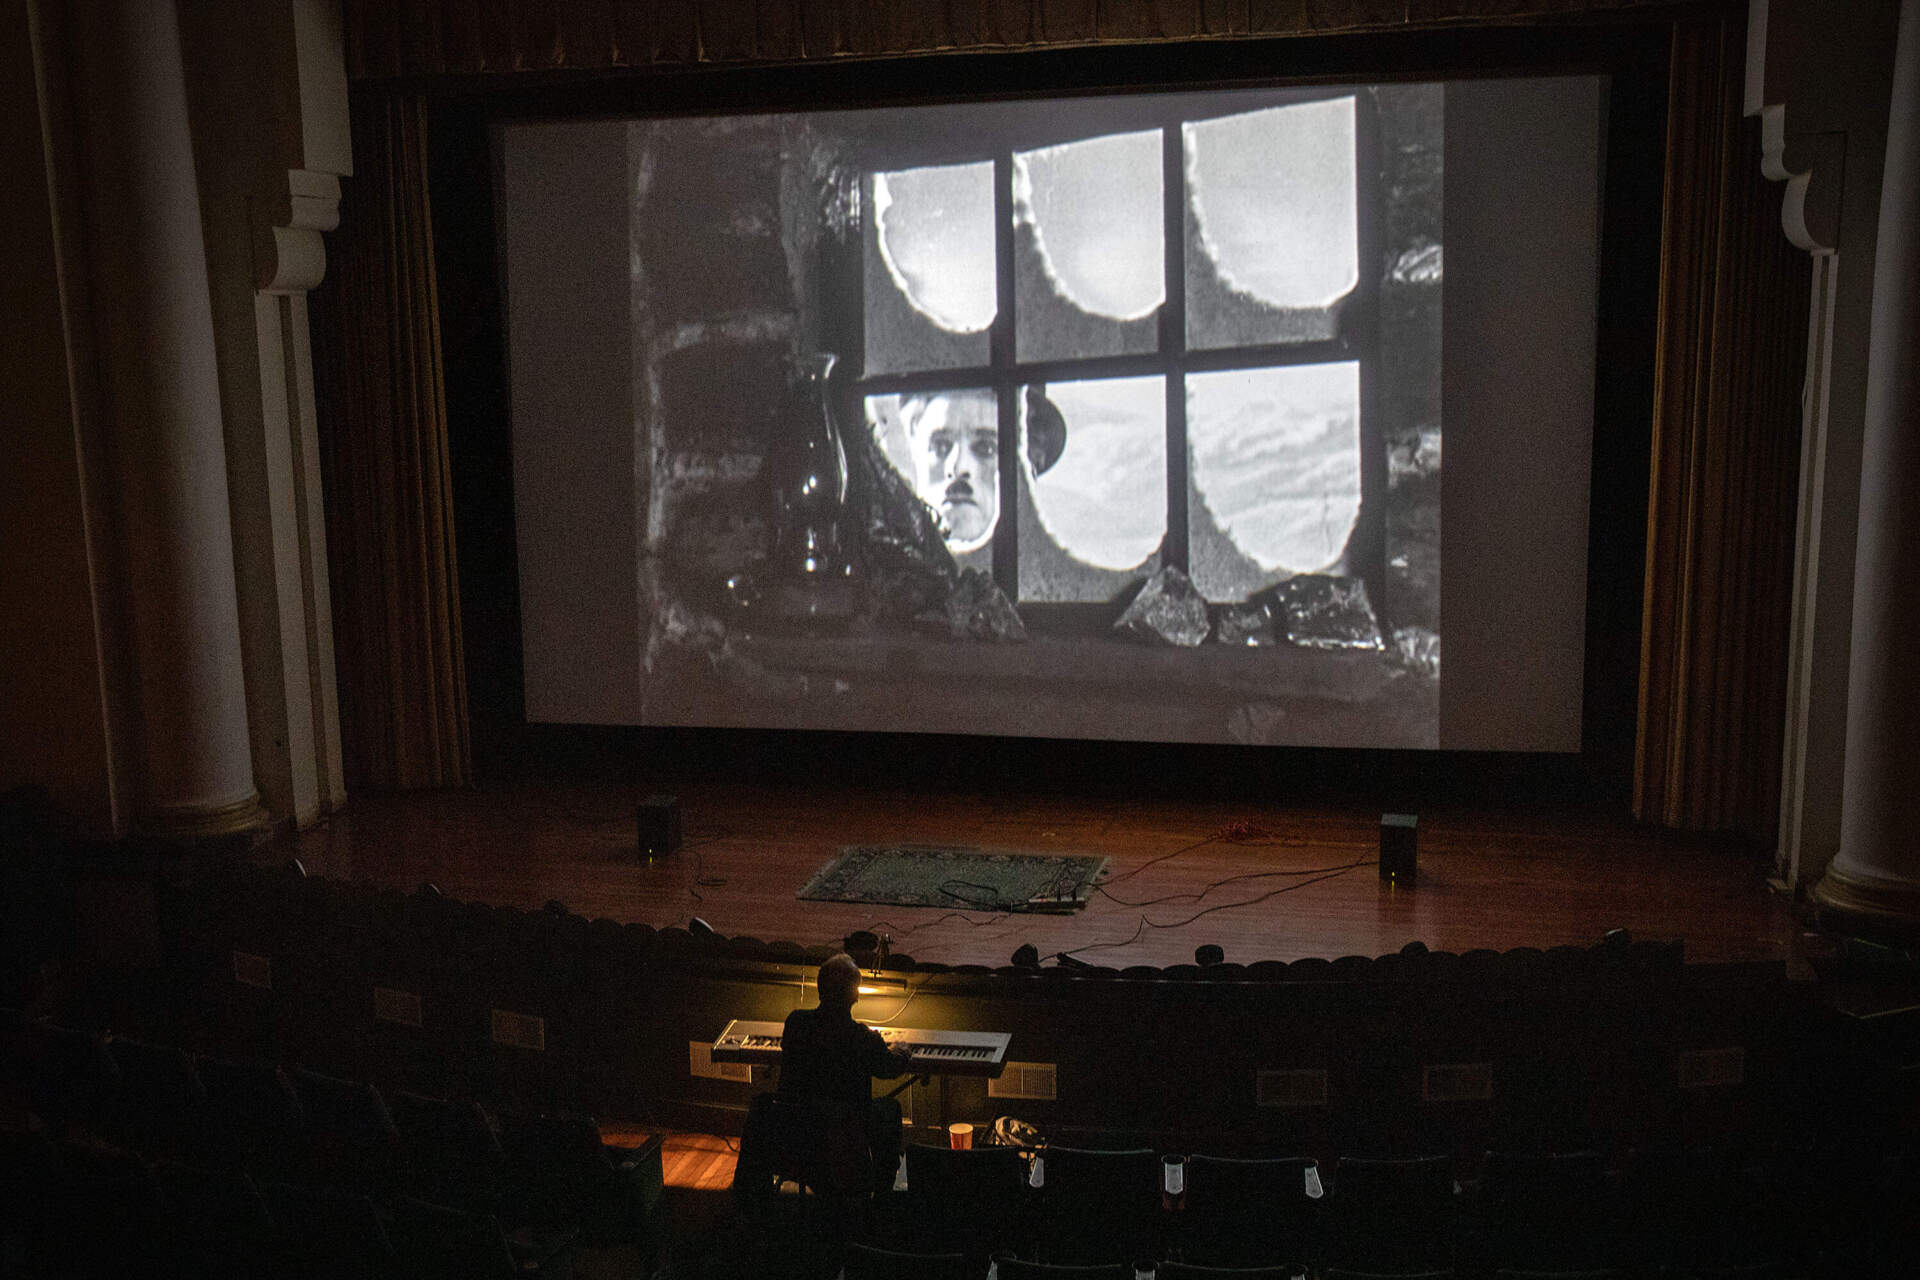 Jeff Rapsis plays music to accompany &quot;The Gold Rush&quot; starring Charlie Chaplin, at the Jane Pickens Theatre in Newport, Rhode Island. 